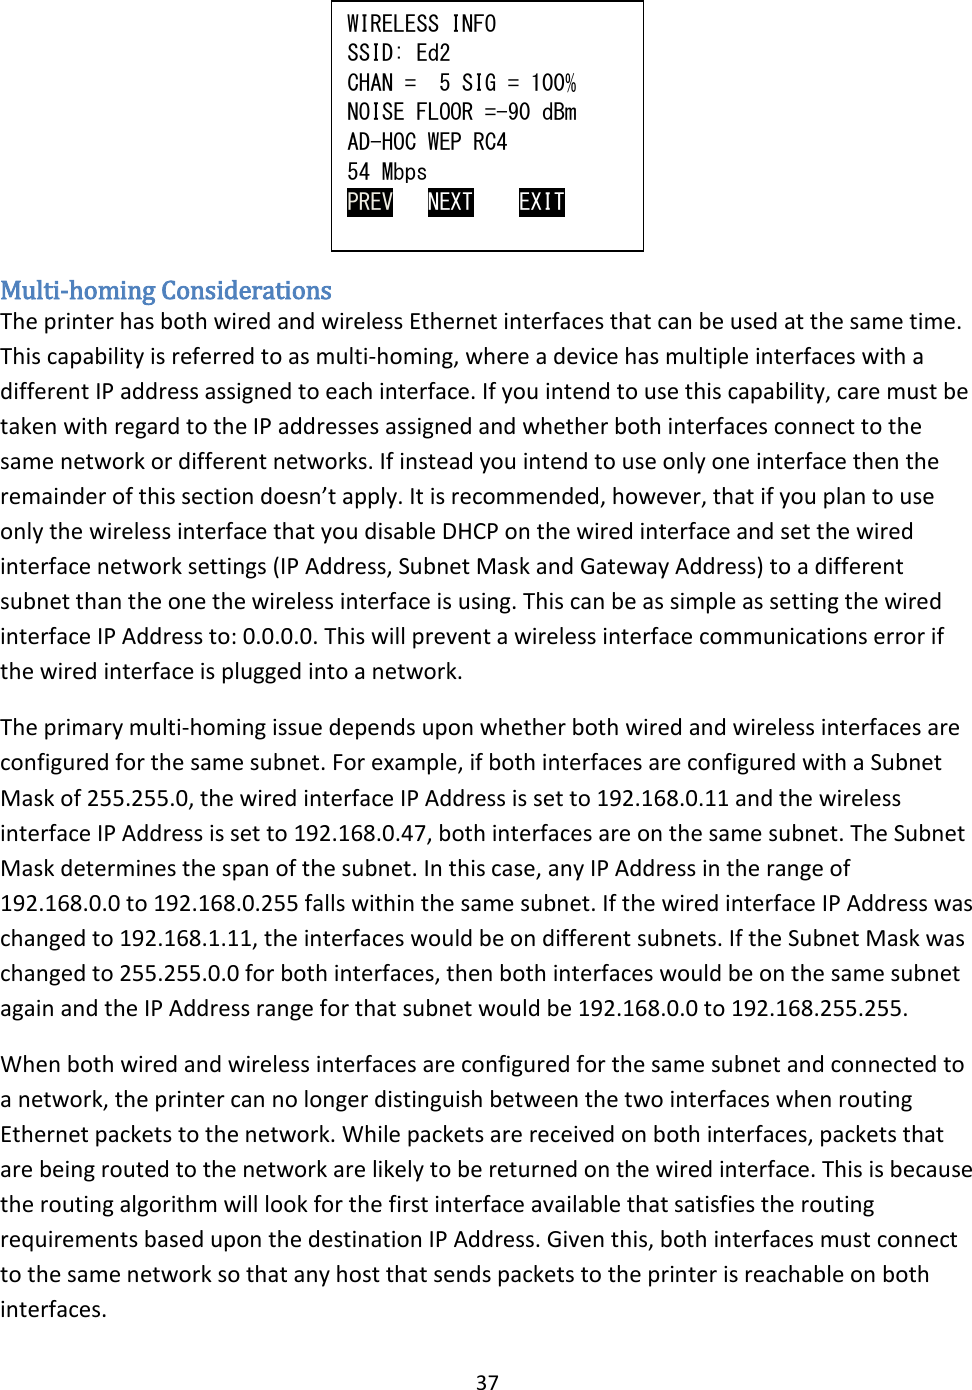 37       Multi-homing Considerations The printer has both wired and wireless Ethernet interfaces that can be used at the same time. This capability is referred to as multi-homing, where a device has multiple interfaces with a different IP address assigned to each interface. If you intend to use this capability, care must be taken with regard to the IP addresses assigned and whether both interfaces connect to the same network or different networks. If instead you intend to use only one interface then the remainder of this section doesn’t apply. It is recommended, however, that if you plan to use only the wireless interface that you disable DHCP on the wired interface and set the wired interface network settings (IP Address, Subnet Mask and Gateway Address) to a different subnet than the one the wireless interface is using. This can be as simple as setting the wired interface IP Address to: 0.0.0.0. This will prevent a wireless interface communications error if the wired interface is plugged into a network. The primary multi-homing issue depends upon whether both wired and wireless interfaces are configured for the same subnet. For example, if both interfaces are configured with a Subnet Mask of 255.255.0, the wired interface IP Address is set to 192.168.0.11 and the wireless interface IP Address is set to 192.168.0.47, both interfaces are on the same subnet. The Subnet Mask determines the span of the subnet. In this case, any IP Address in the range of 192.168.0.0 to 192.168.0.255 falls within the same subnet. If the wired interface IP Address was changed to 192.168.1.11, the interfaces would be on different subnets. If the Subnet Mask was changed to 255.255.0.0 for both interfaces, then both interfaces would be on the same subnet again and the IP Address range for that subnet would be 192.168.0.0 to 192.168.255.255. When both wired and wireless interfaces are configured for the same subnet and connected to a network, the printer can no longer distinguish between the two interfaces when routing Ethernet packets to the network. While packets are received on both interfaces, packets that are being routed to the network are likely to be returned on the wired interface. This is because the routing algorithm will look for the first interface available that satisfies the routing requirements based upon the destination IP Address. Given this, both interfaces must connect to the same network so that any host that sends packets to the printer is reachable on both interfaces. WIRELESS INFO SSID: Ed2 CHAN =  5 SIG = 100% NOISE FLOOR =-90 dBm AD-HOC WEP RC4 54 Mbps PREV   NEXT    EXIT 